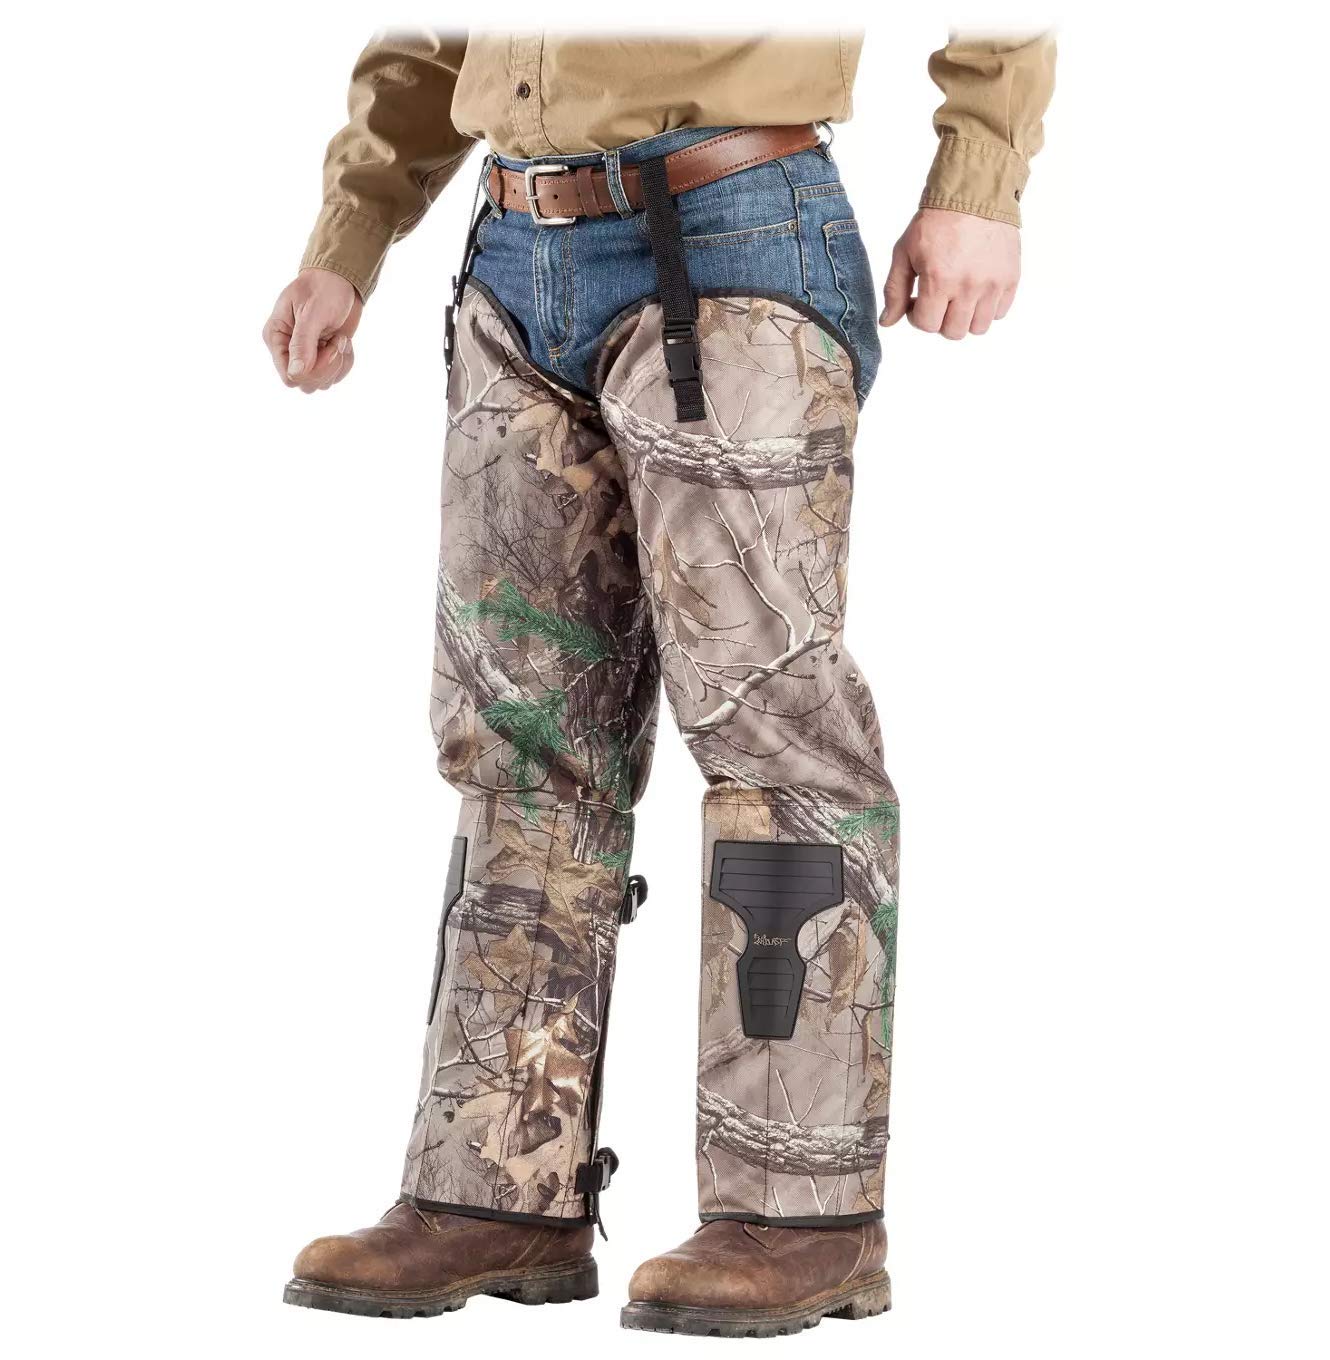 Everlast&reg; ForEverlast Snake Guard Chaps, Camouflage- Hunting Gear with Full Protection for Legs from Snake Bites & Briar Thorns & Brush